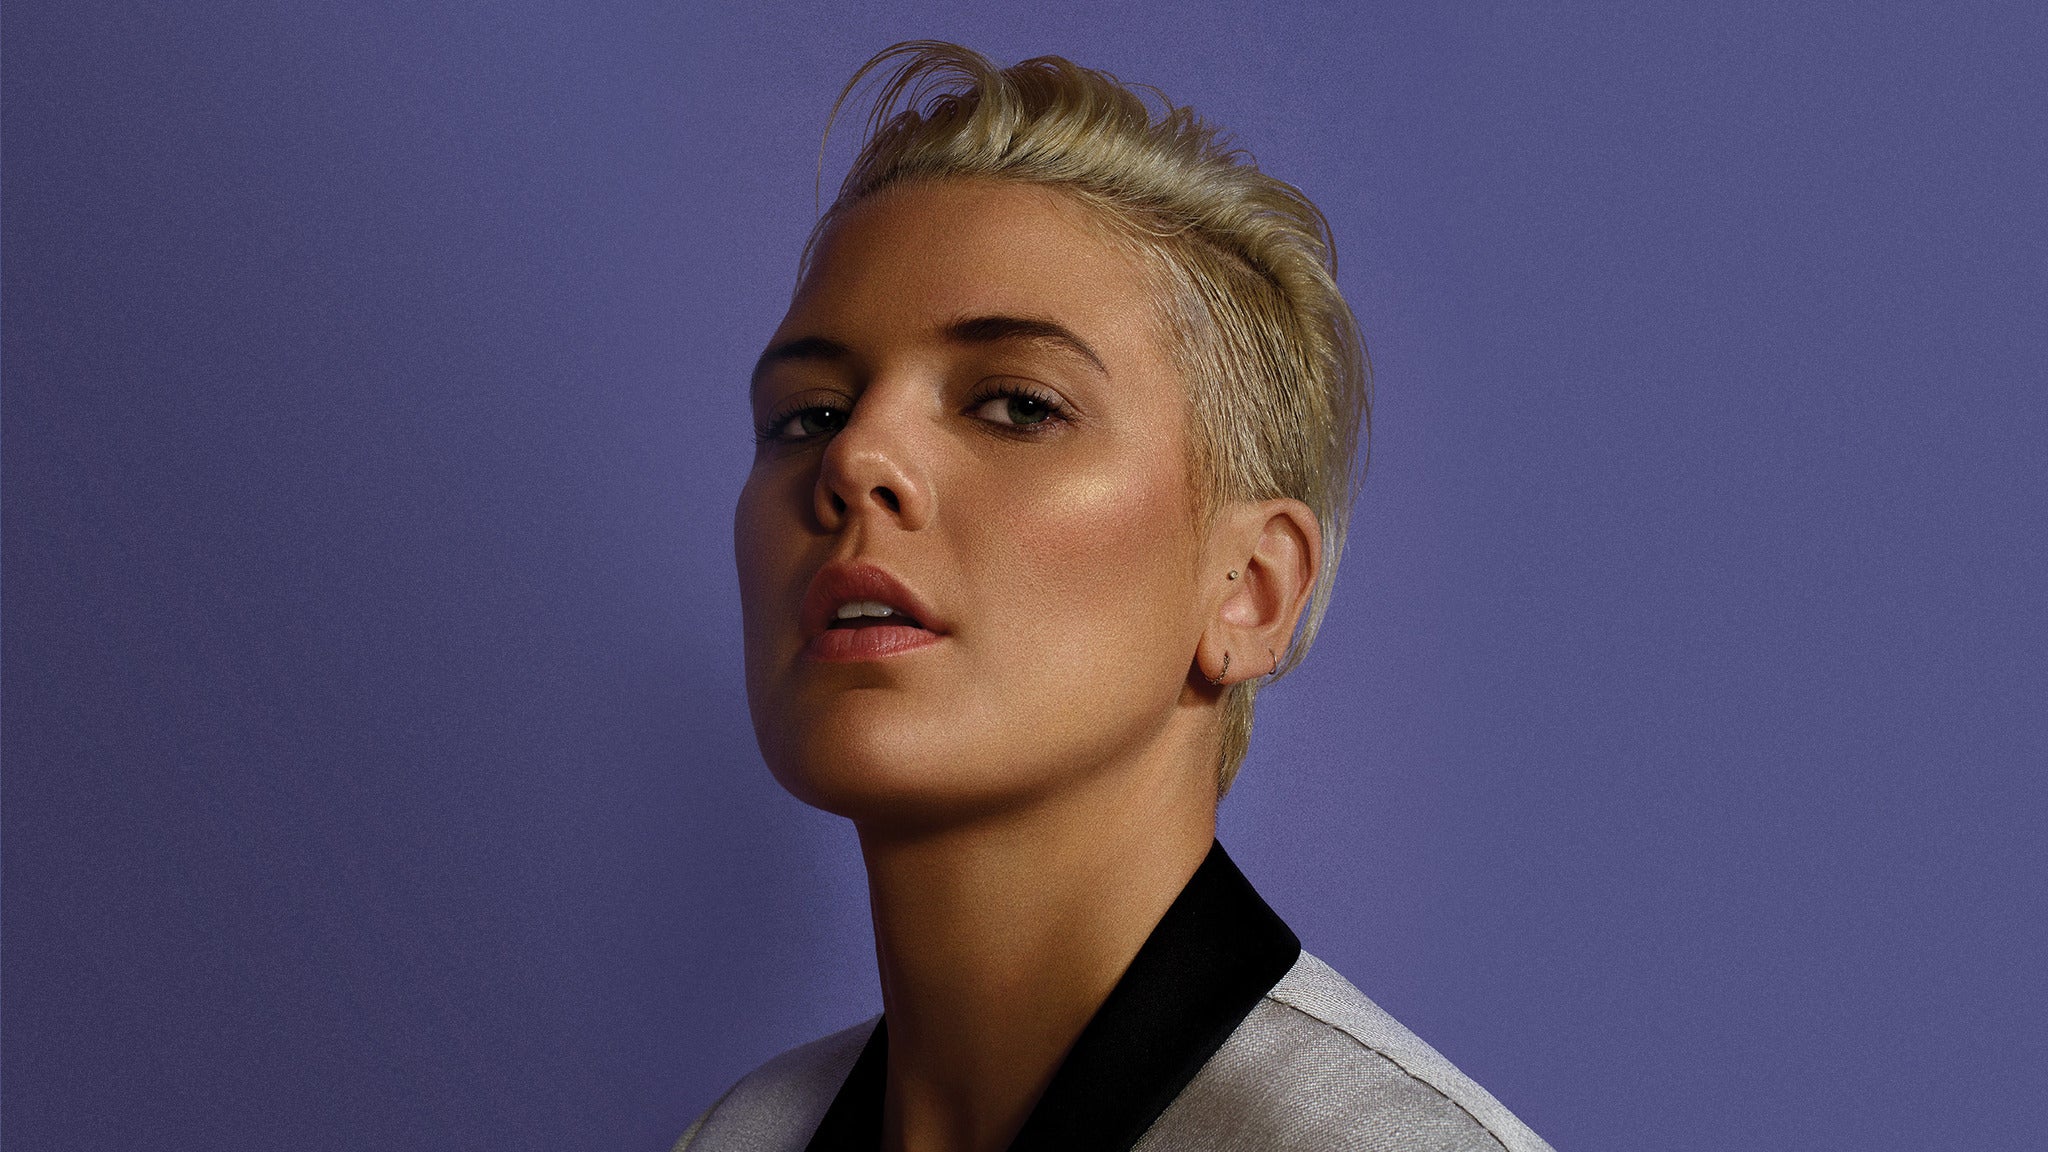 Betty Who in Asbury Park promo photo for Spotify presale offer code